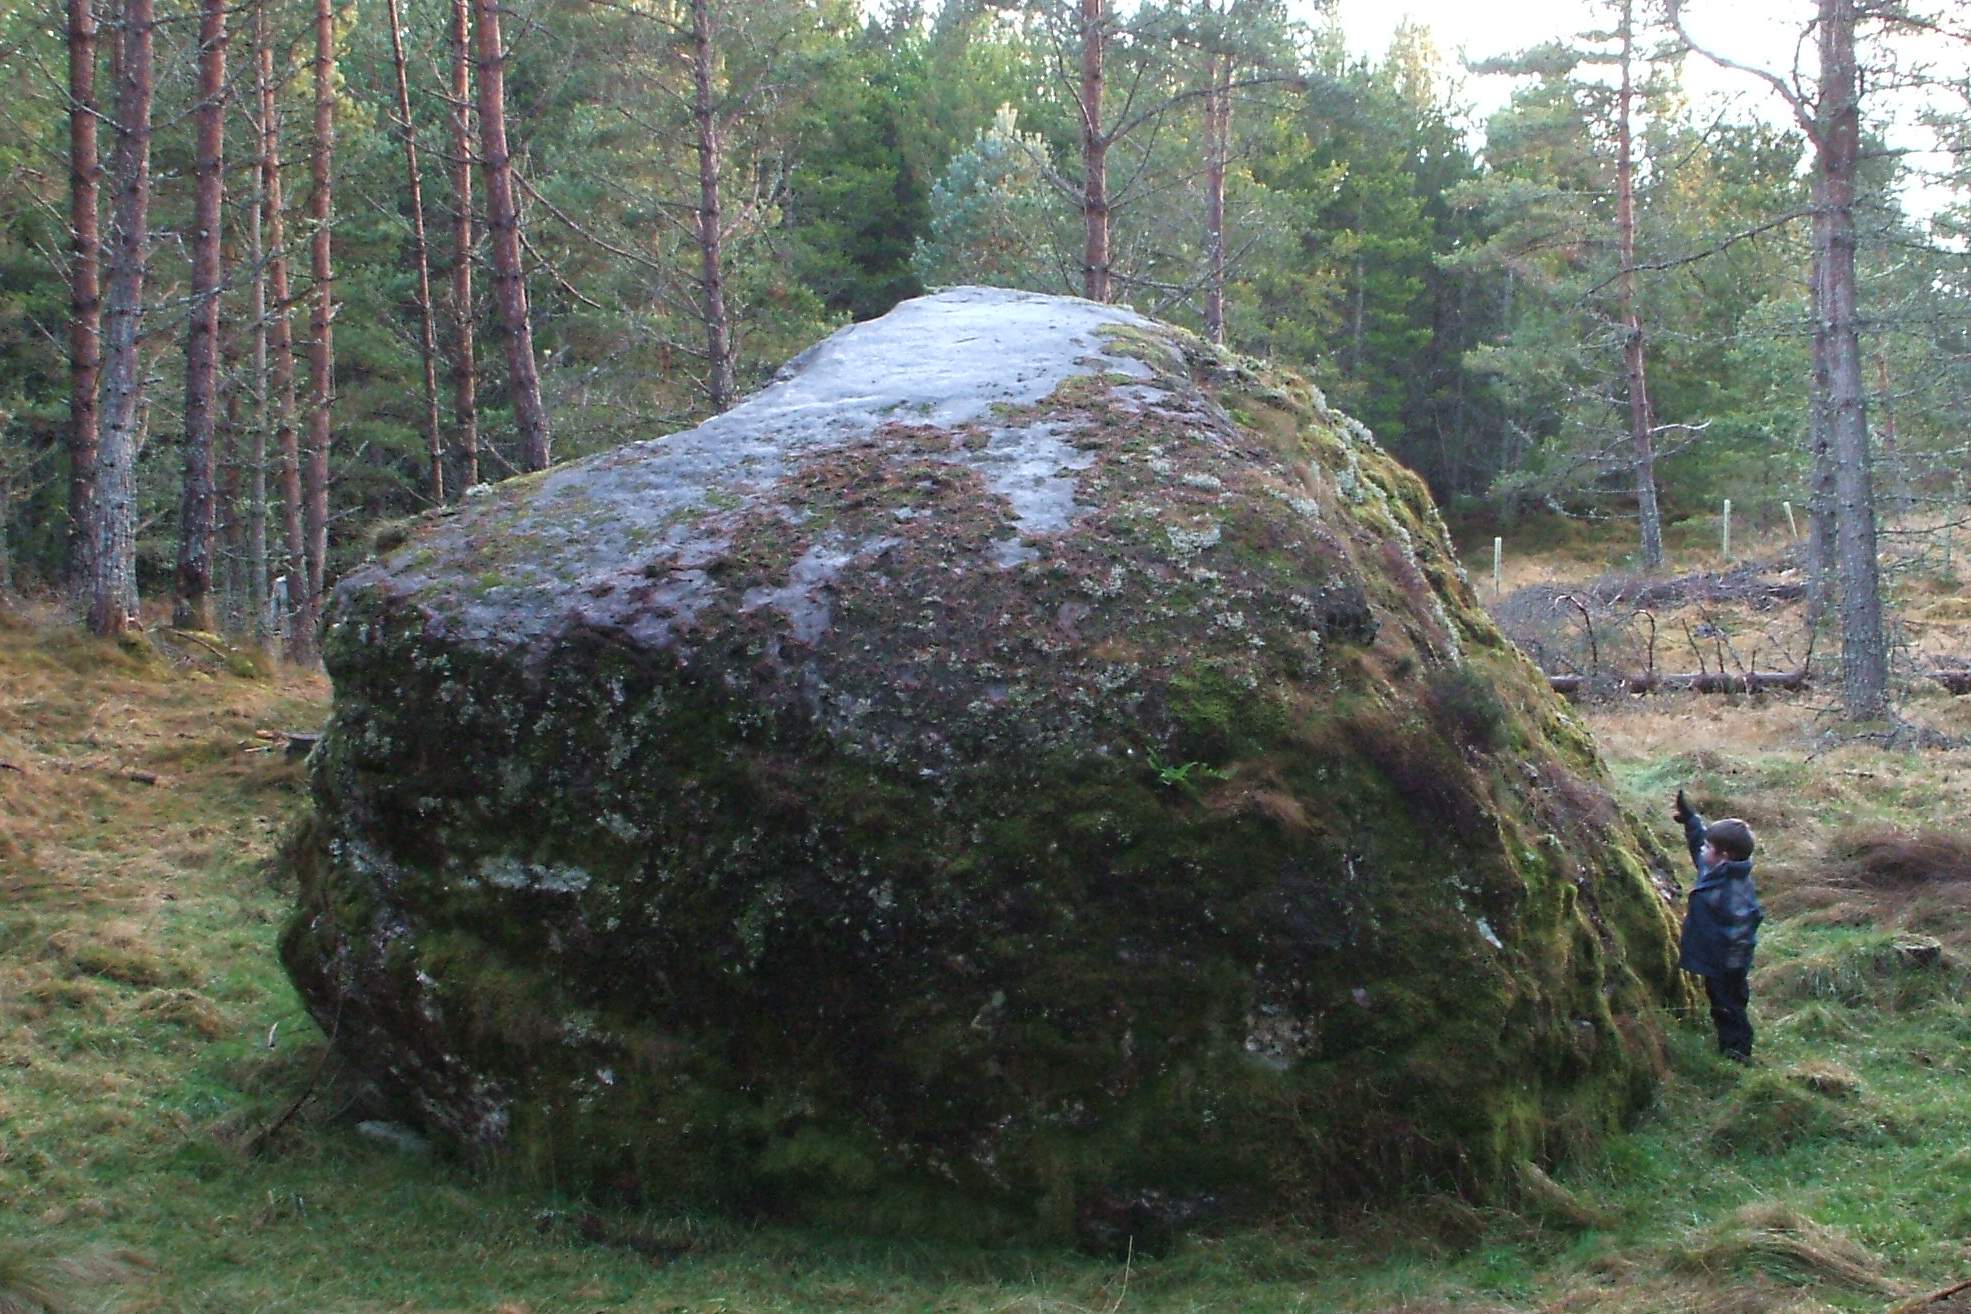 the giant rock is very large and it looks like it's broken into pieces